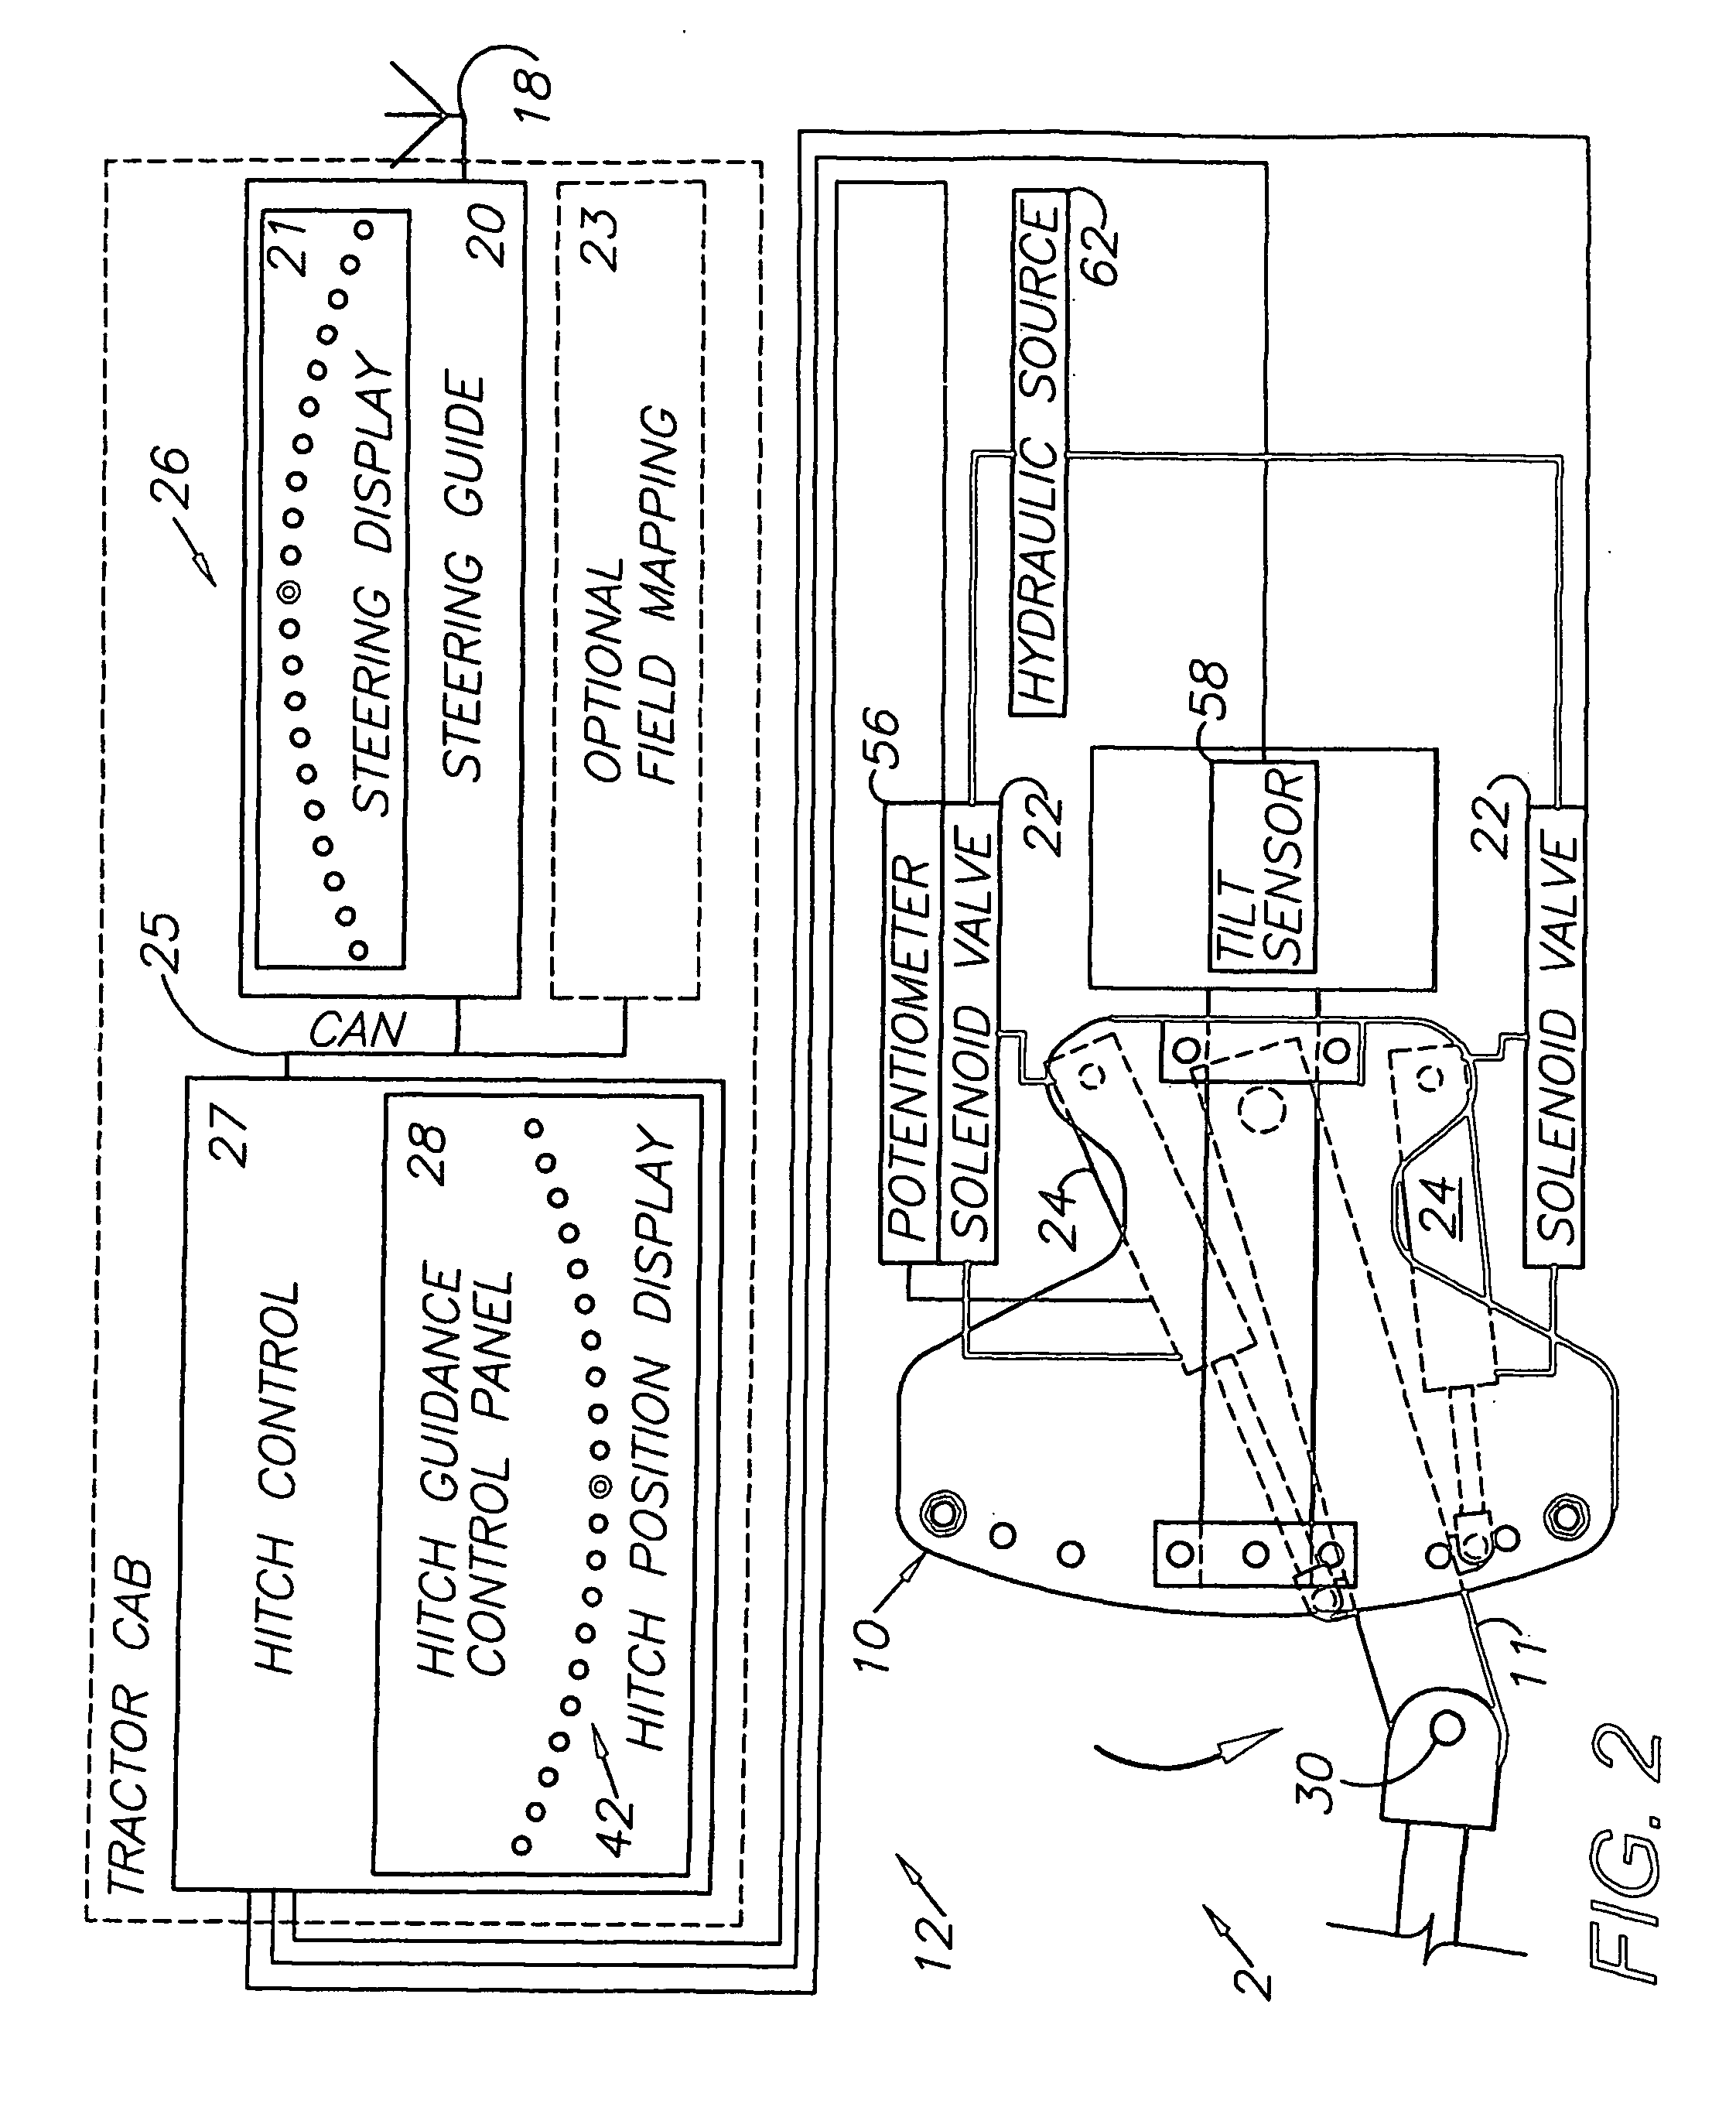 Articulated equipment position control system and method